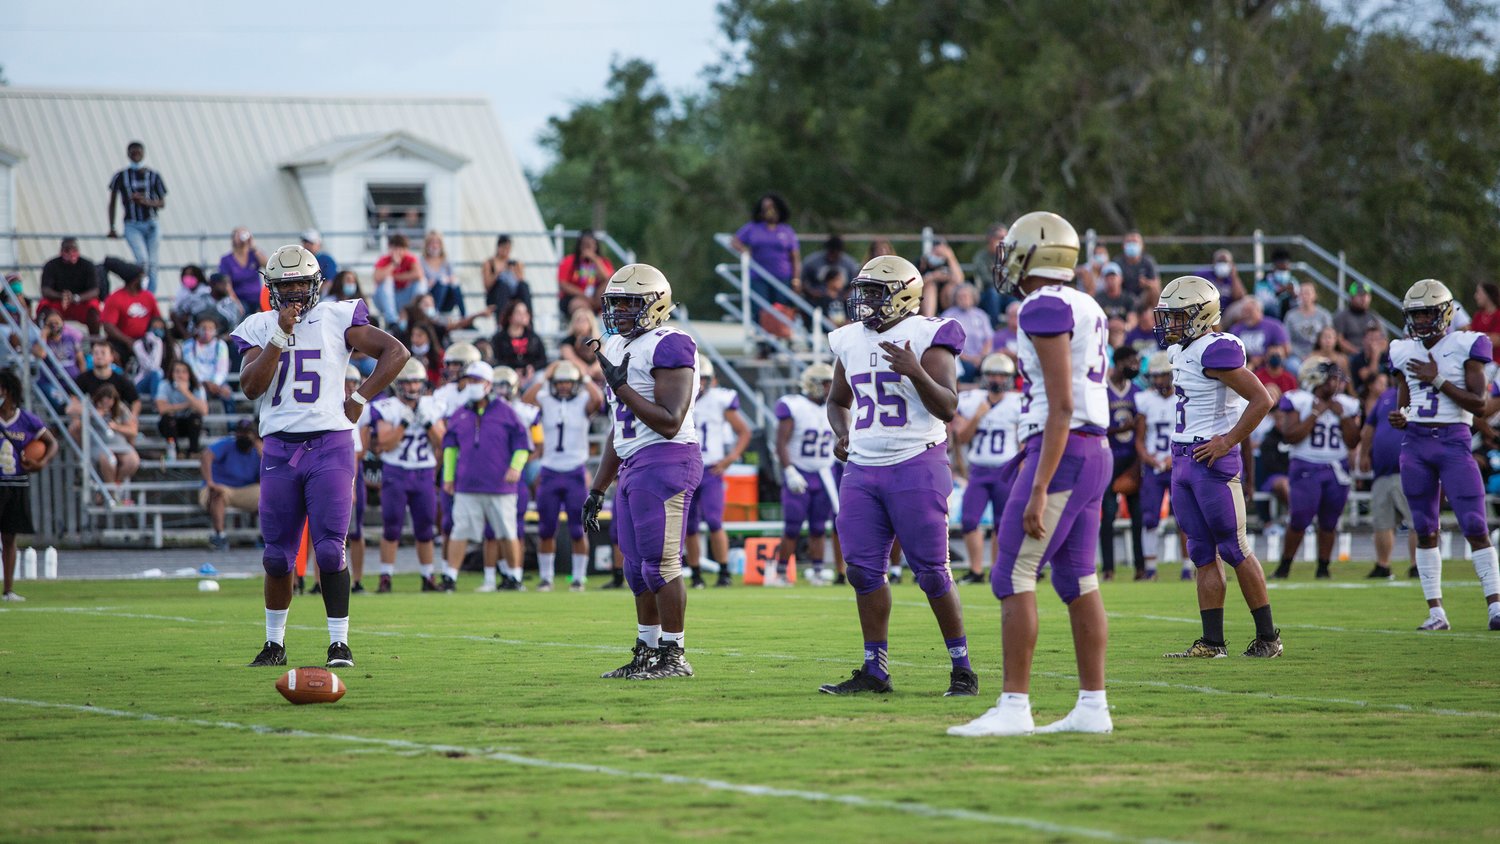 The Brahman defense was able to hold back a potent John Carroll Catholic offense on Sept. 18. But Okeechobee’s struggles on offense kept the team from coming away with a win.